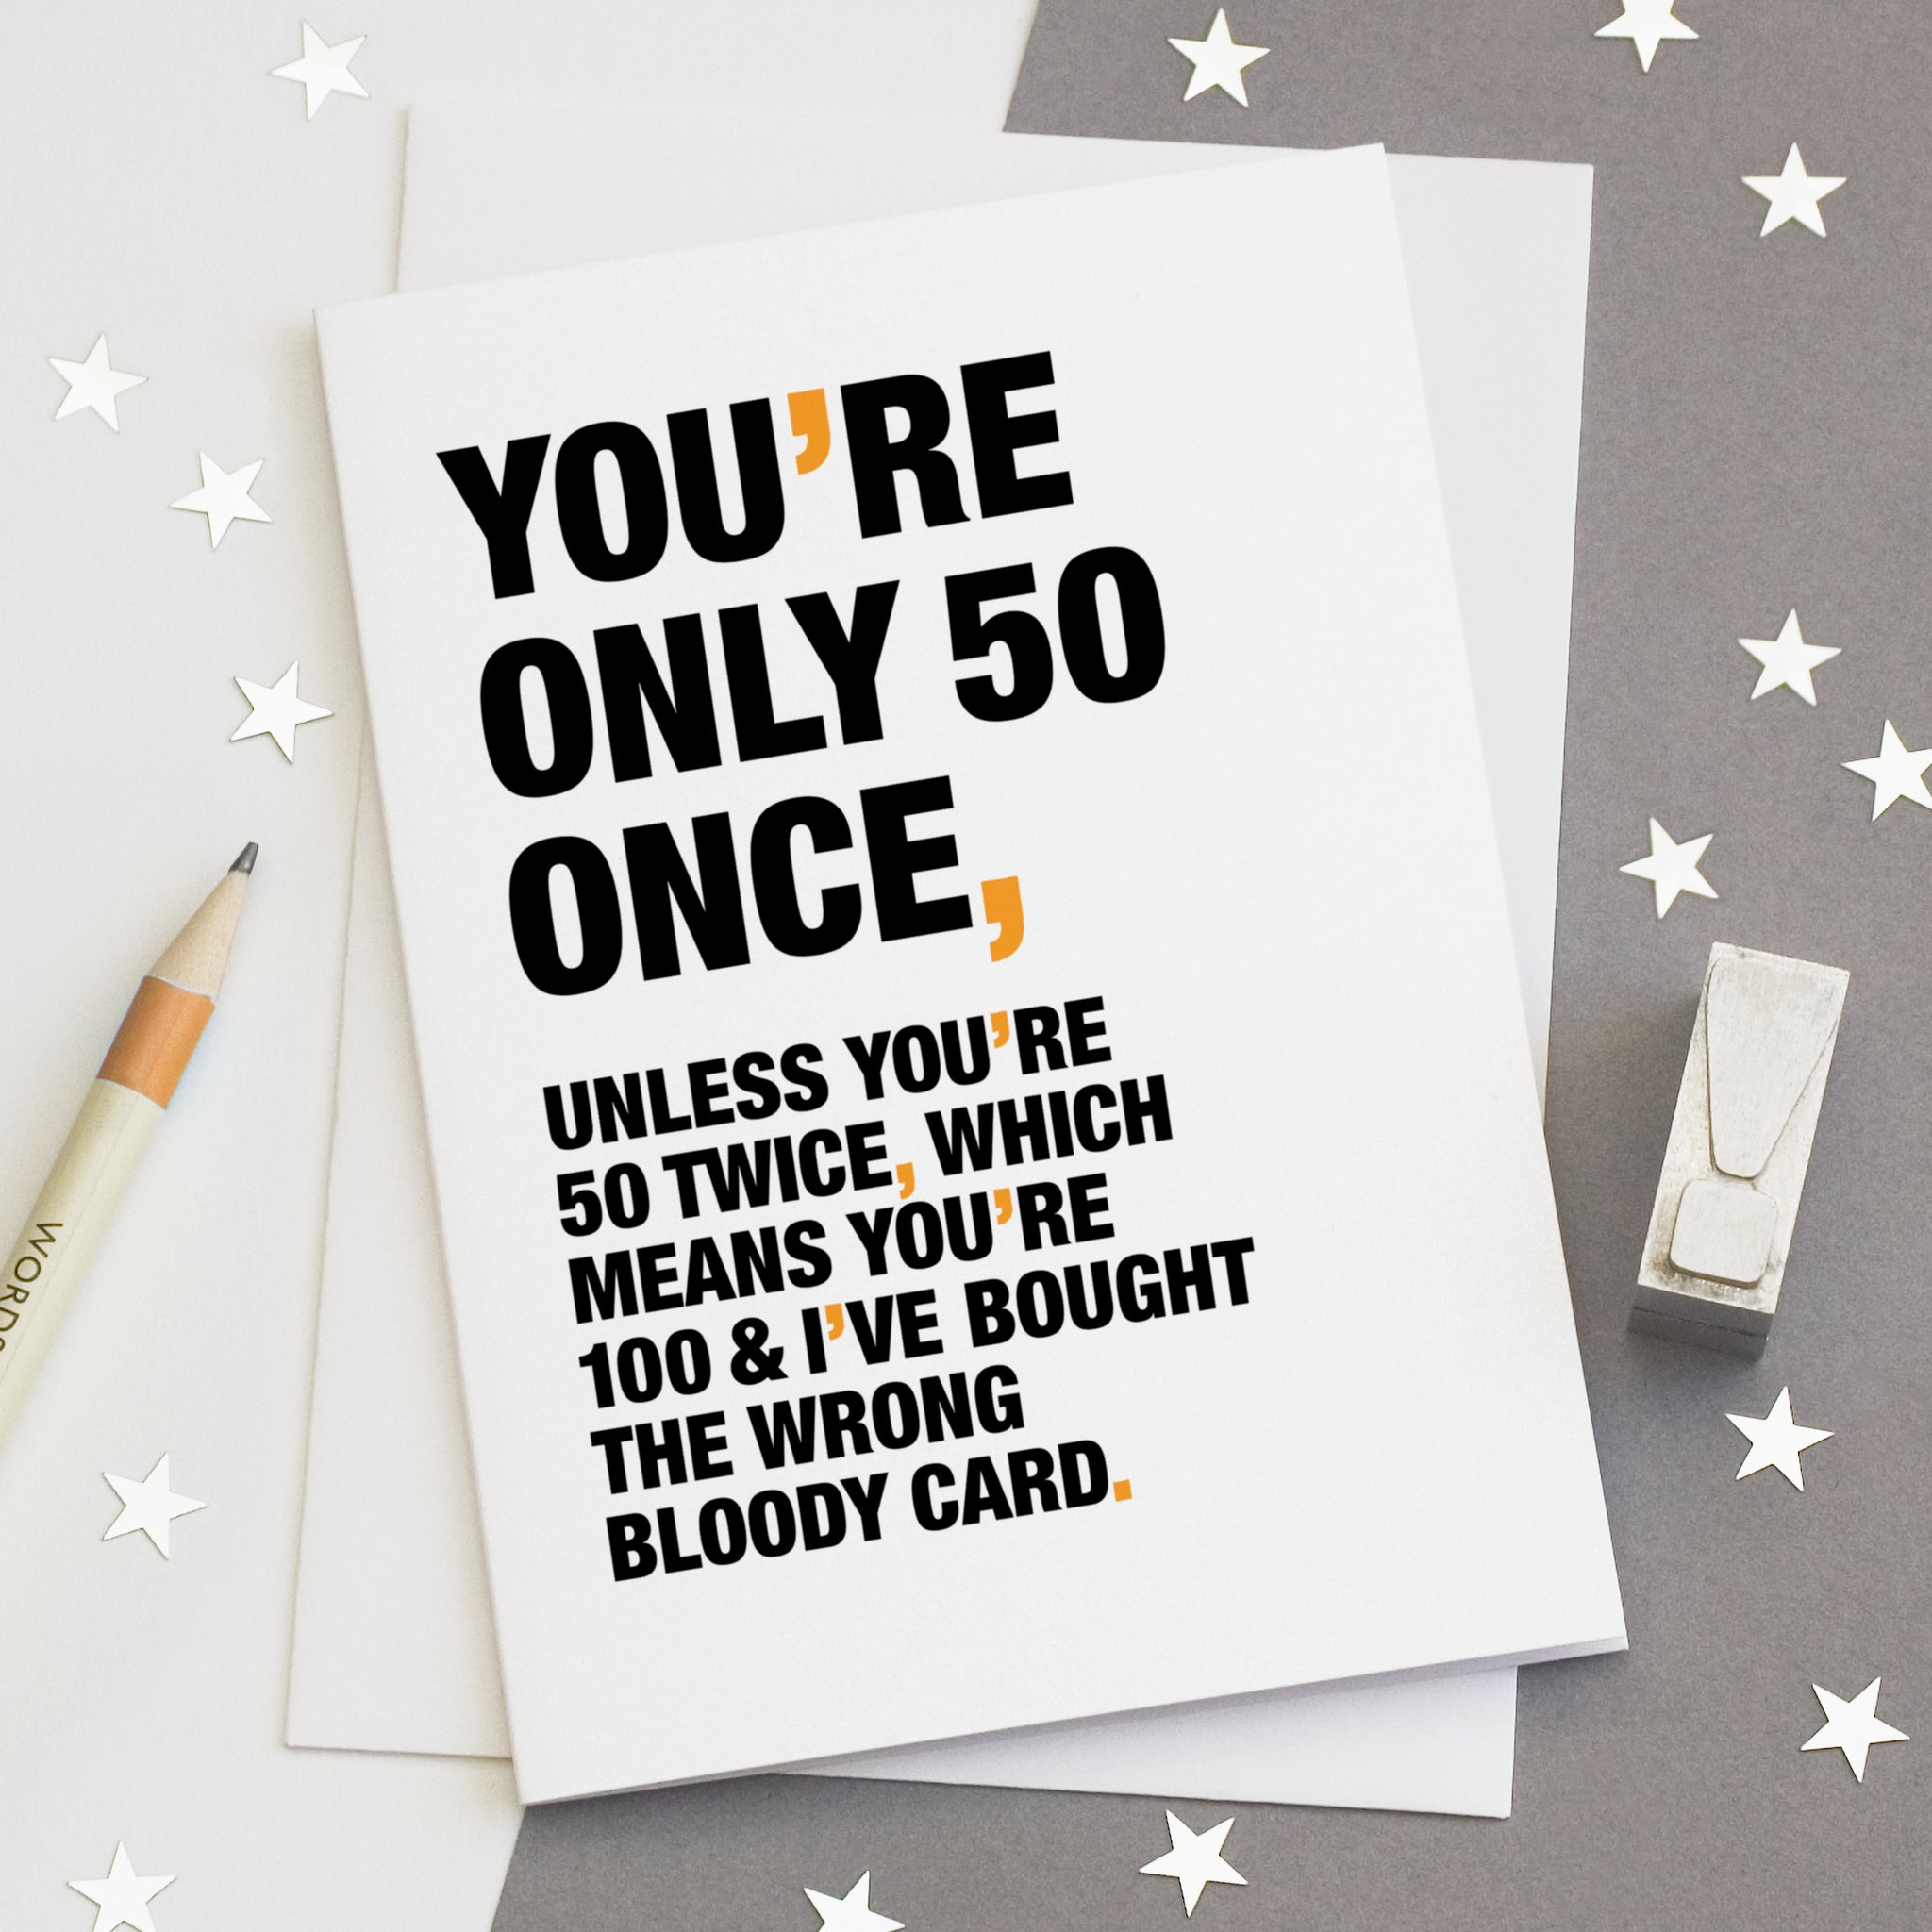 A funny birthday card saying 'you're only 50 once, unless you're 50 twice, which means you're 100 and I've bought the wrong bloody card'.